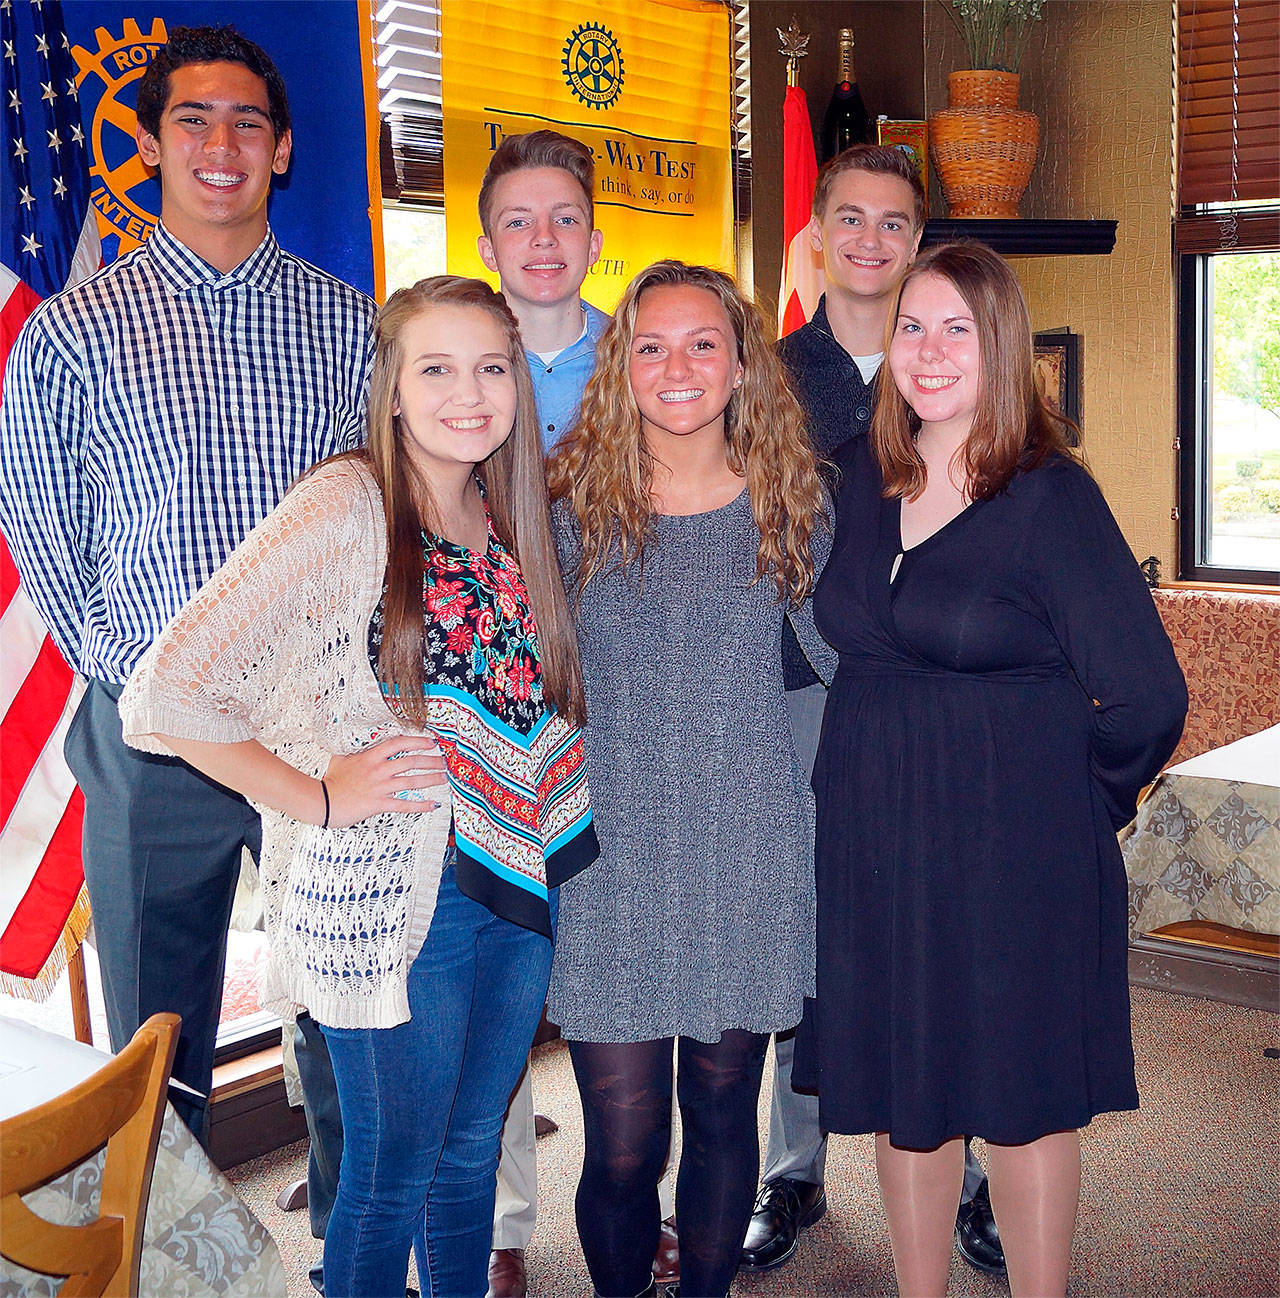 Monroe Rotary Club members recently recognized Students of the Month from Monroe and Sultan high schools. Pictured from left are Cody Schwindt, Ashley Wold, James Stein, Tiannah Day, Mitchell Nottingham and Marisa Lammers. (Contributed photo)